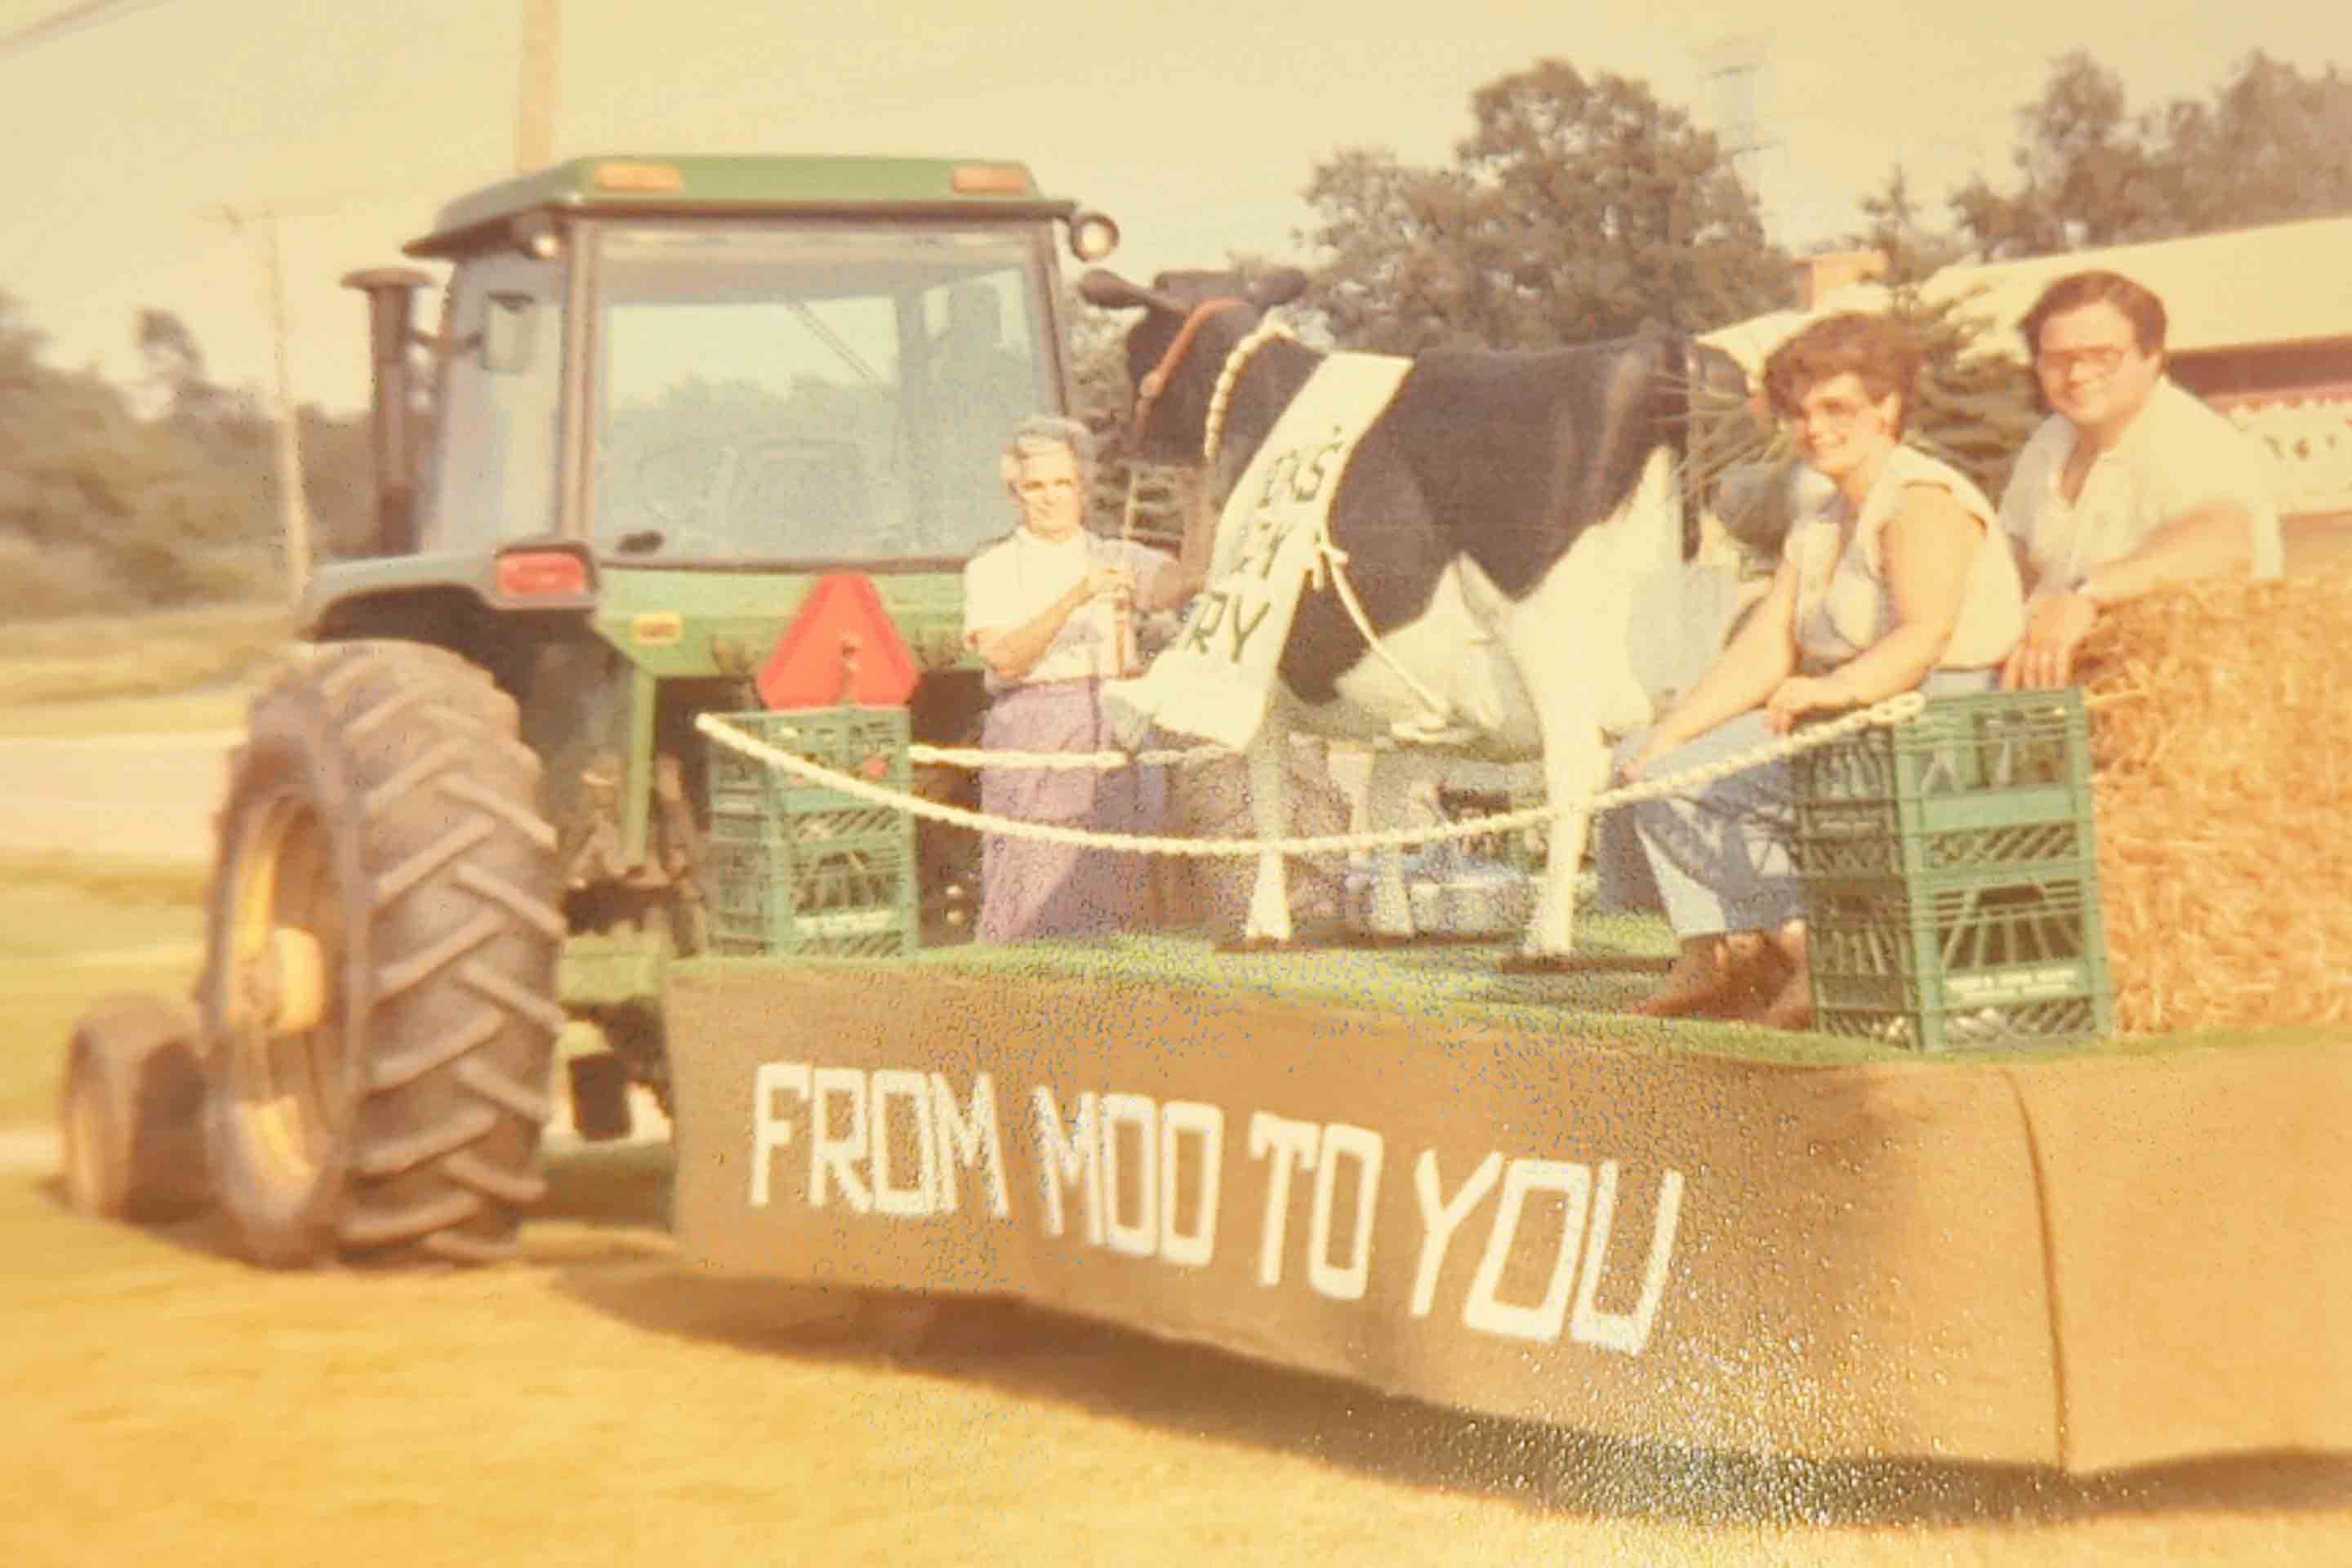 Cooks Farm Dairy Float Reading "From Moo To You" in Clarkston, Michigan Parade 1980's